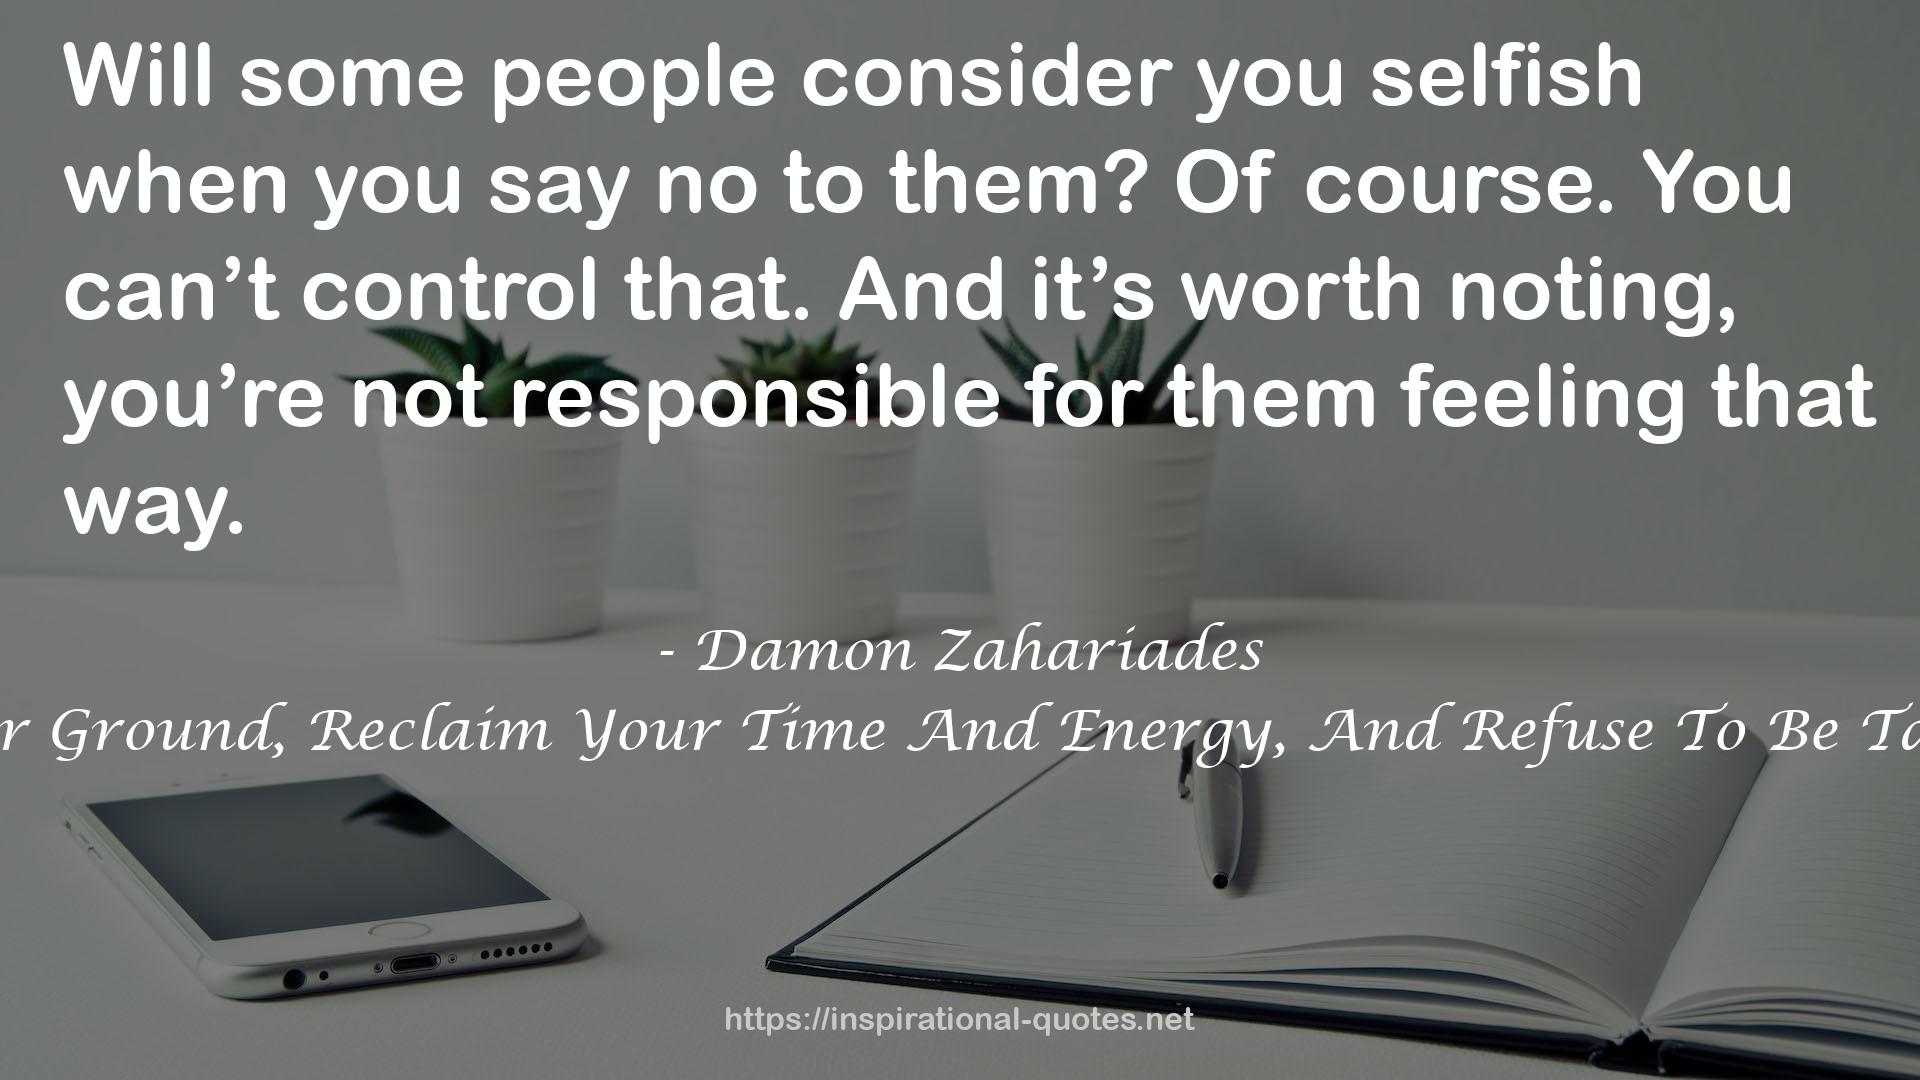 The Art Of Saying NO: How To Stand Your Ground, Reclaim Your Time And Energy, And Refuse To Be Taken For Granted (Without Feeling Guilty!) QUOTES